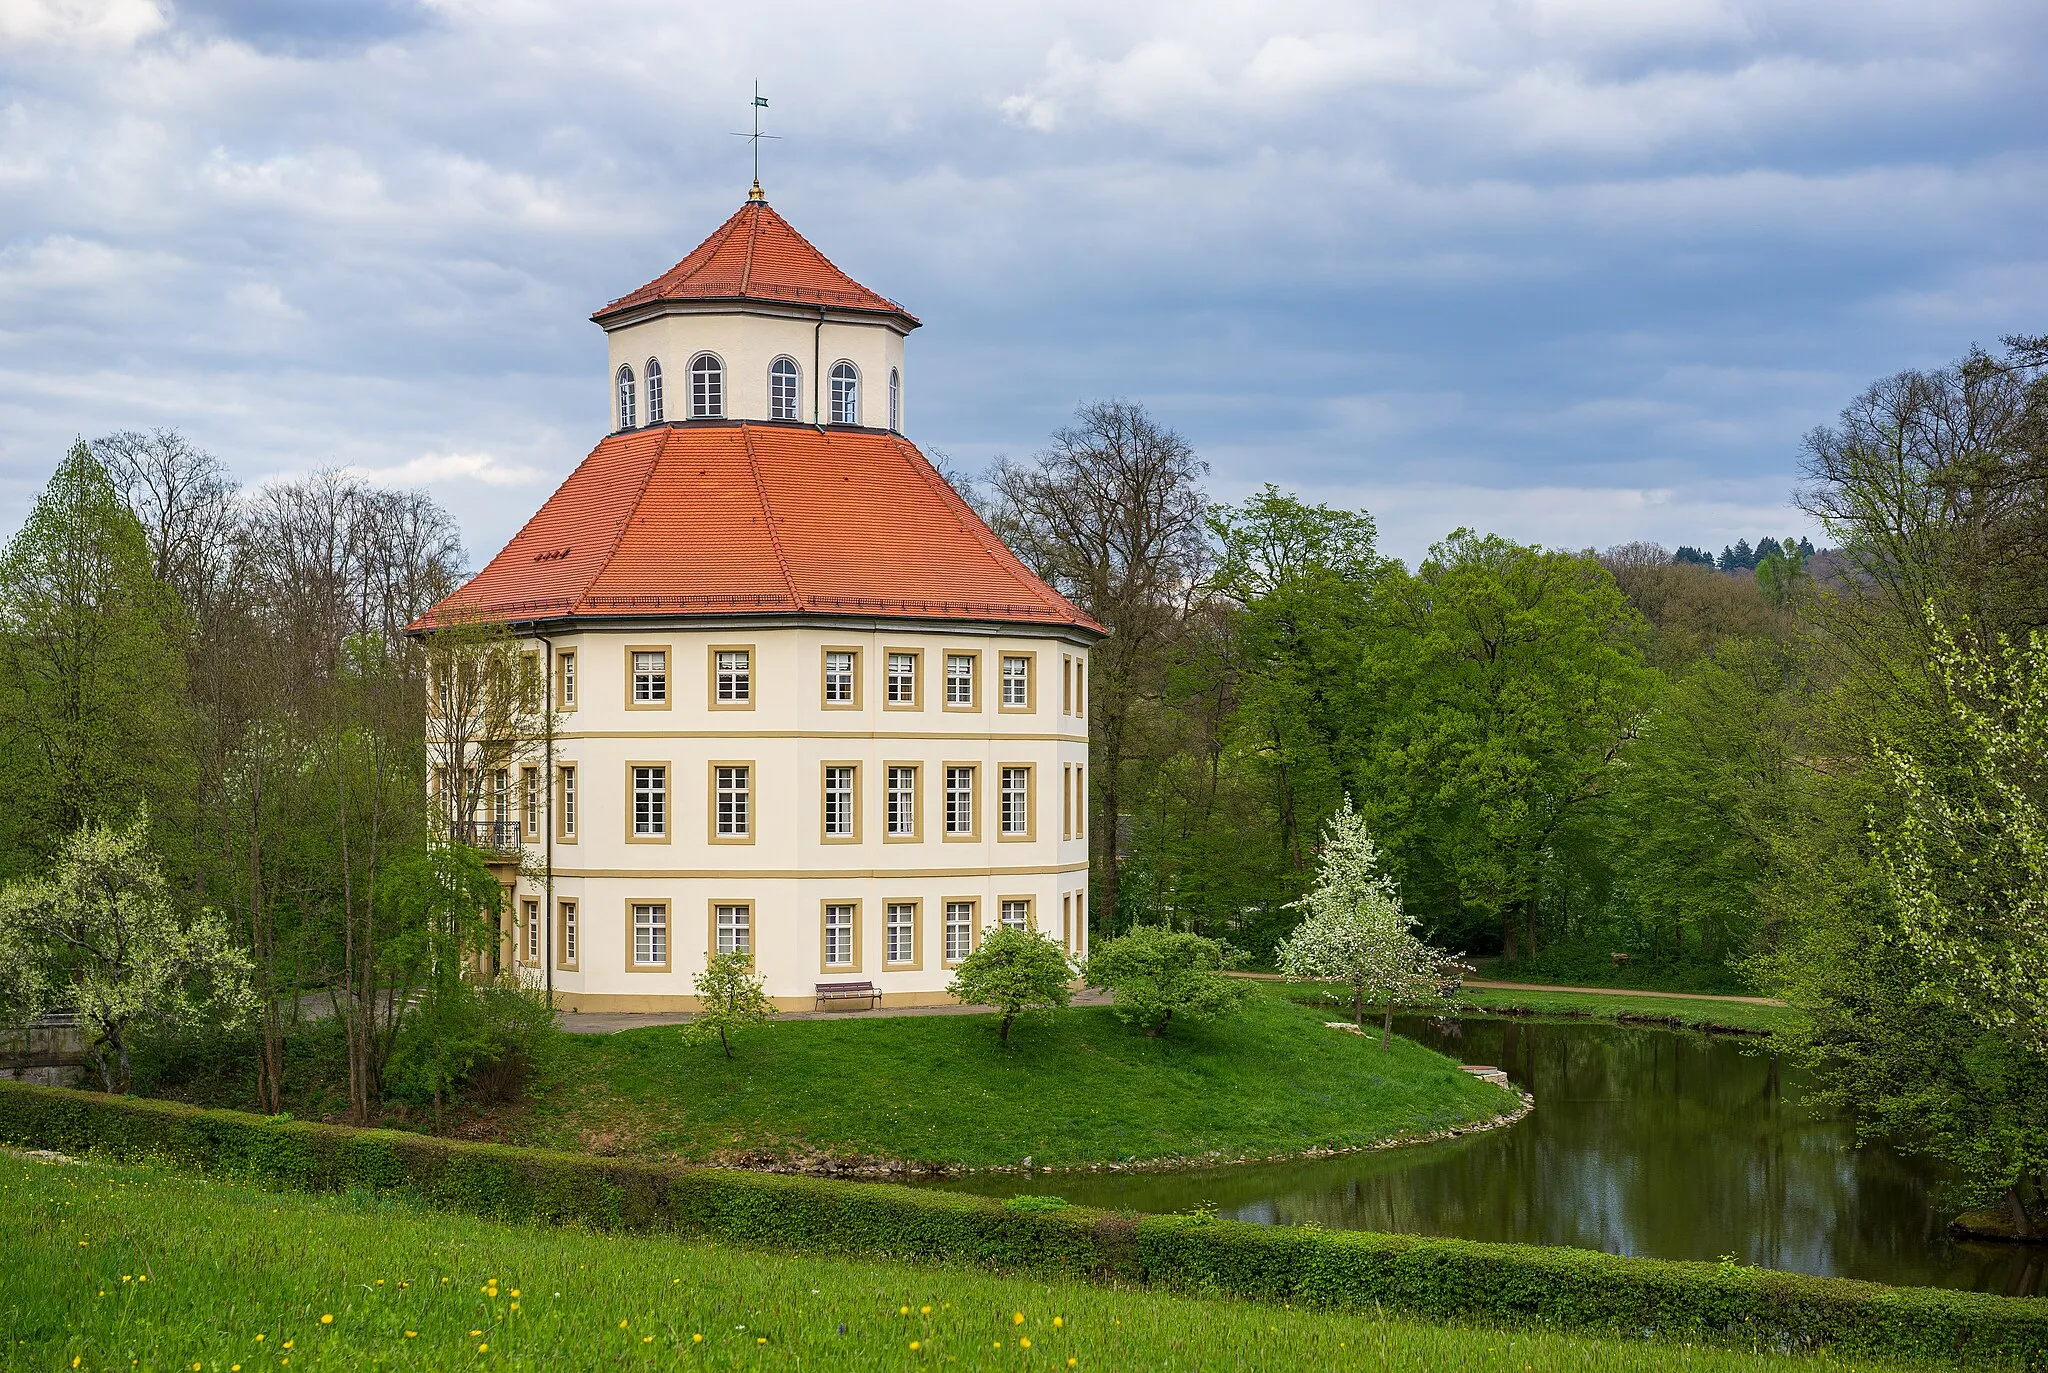 Photo showing: Oppenweiler, Germany: The octogonal residential castle set on a lake, built in 1782, today the townhall. Seen from south-west from the castle gardens which were laid out at the same time.